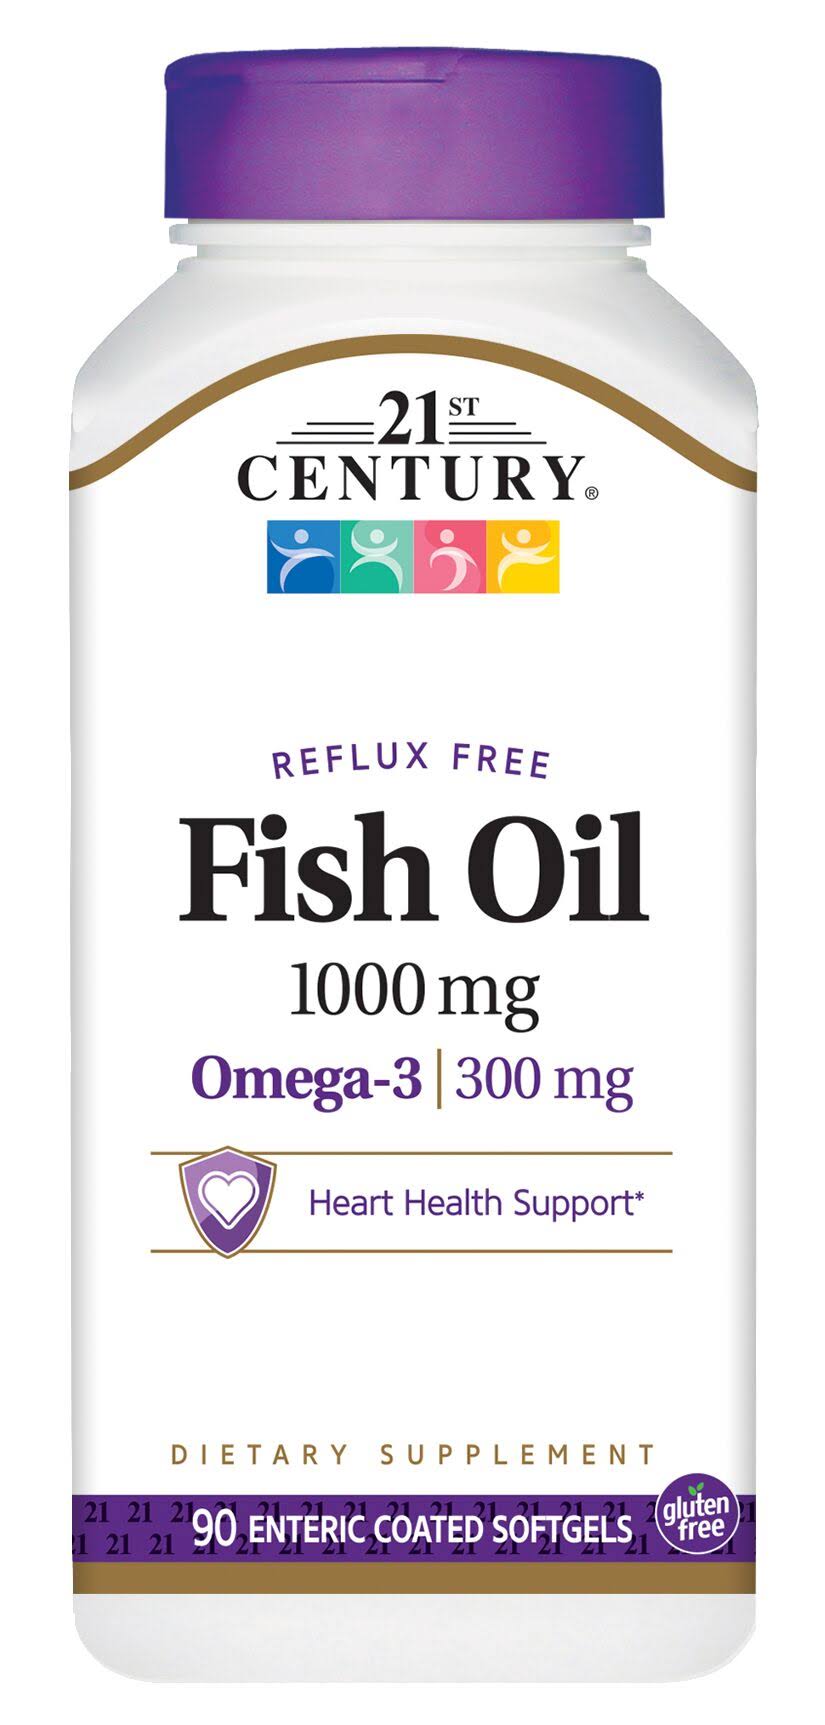 21st Century Fish Oil Dietary Supplement - 90 Count